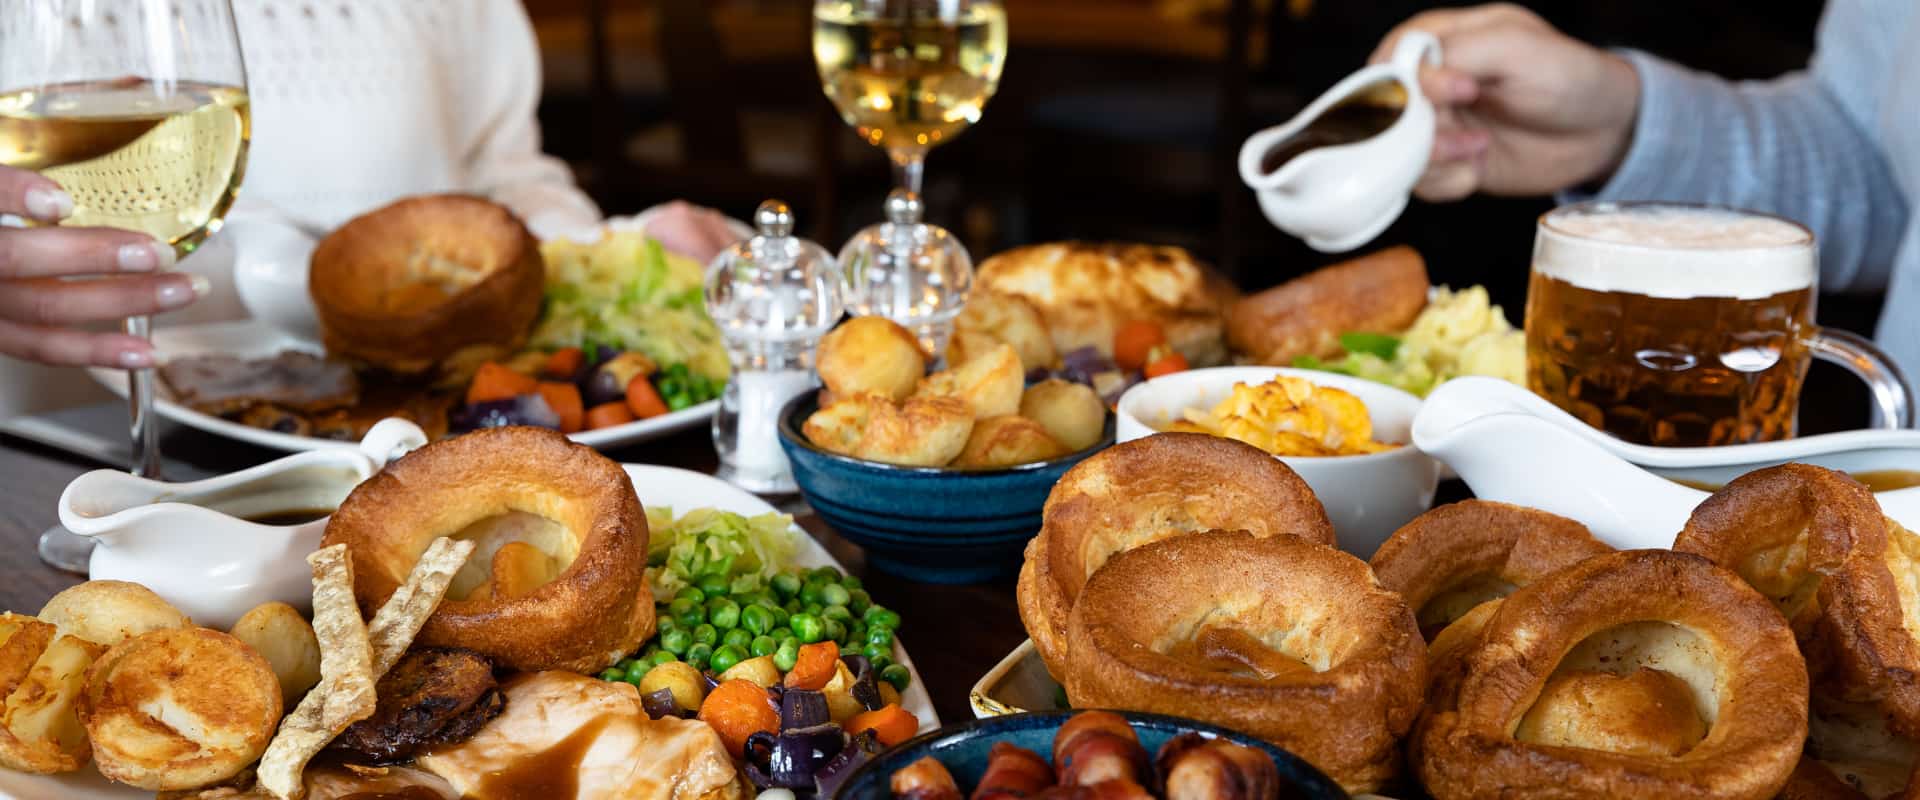 Enjoy a delicious Sunday lunch at Village Inn